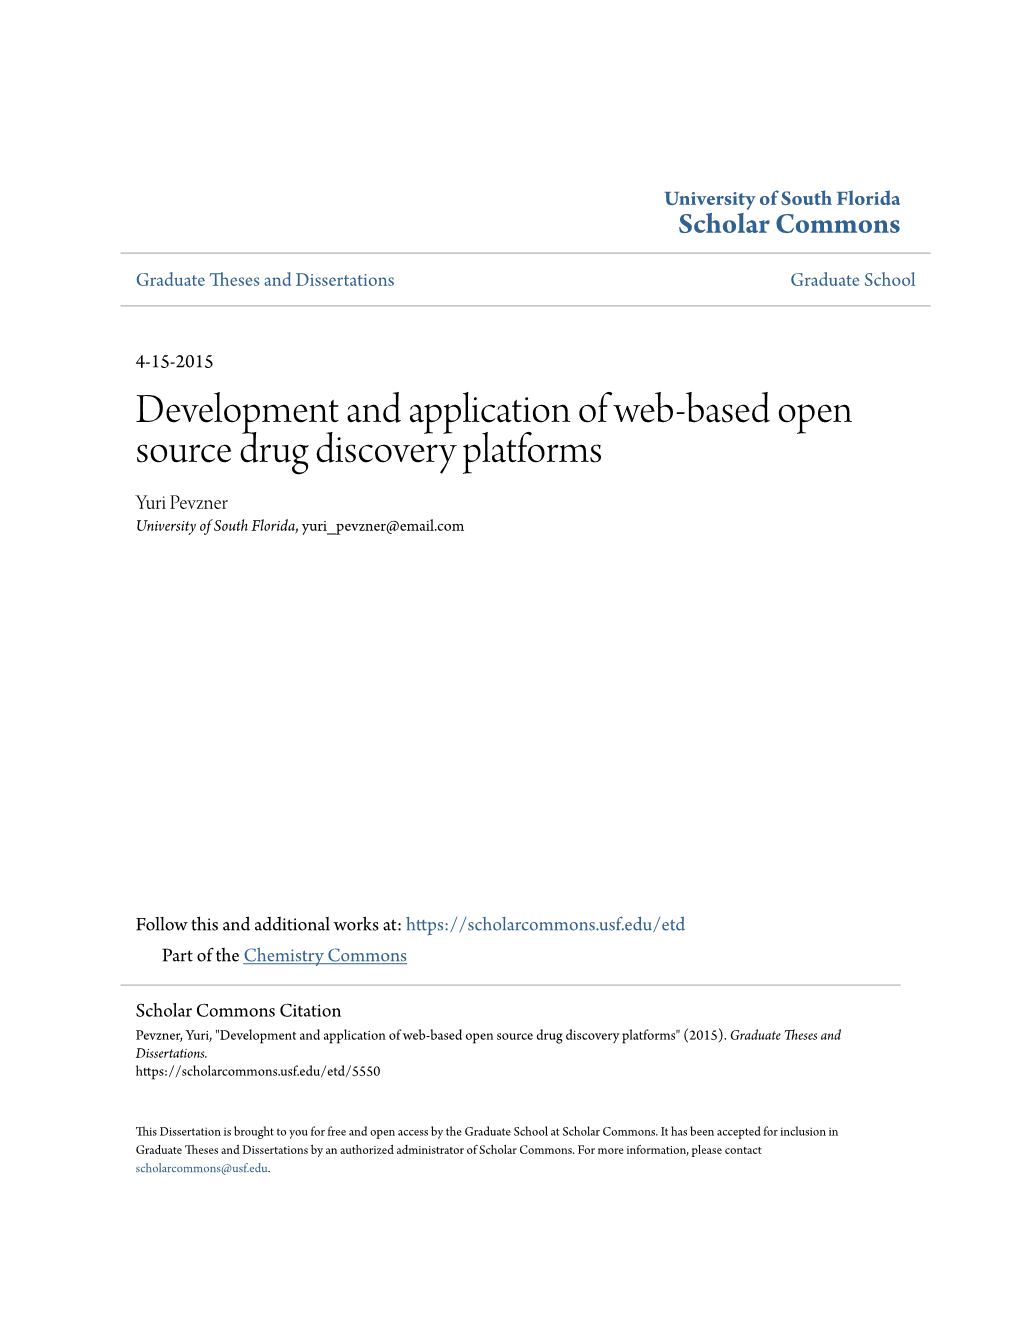 Development and Application of Web-Based Open Source Drug Discovery Platforms Yuri Pevzner University of South Florida, Yuri Pevzner@Email.Com